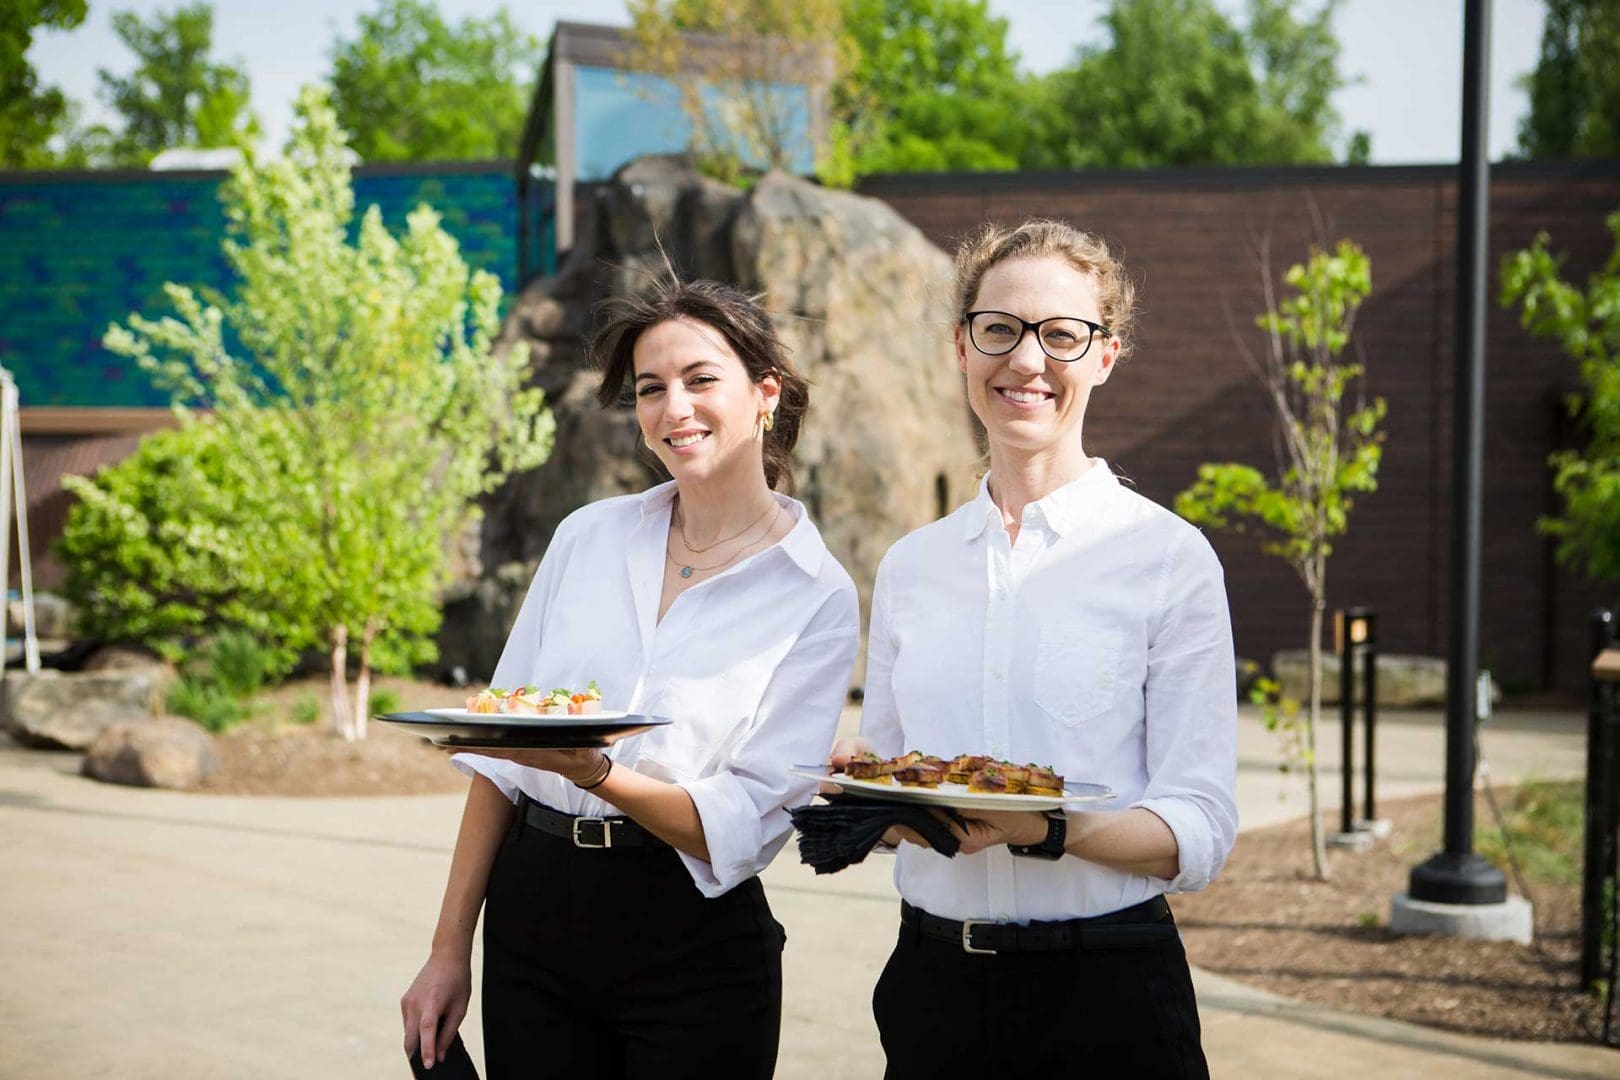 Two servers holding trays and smiling